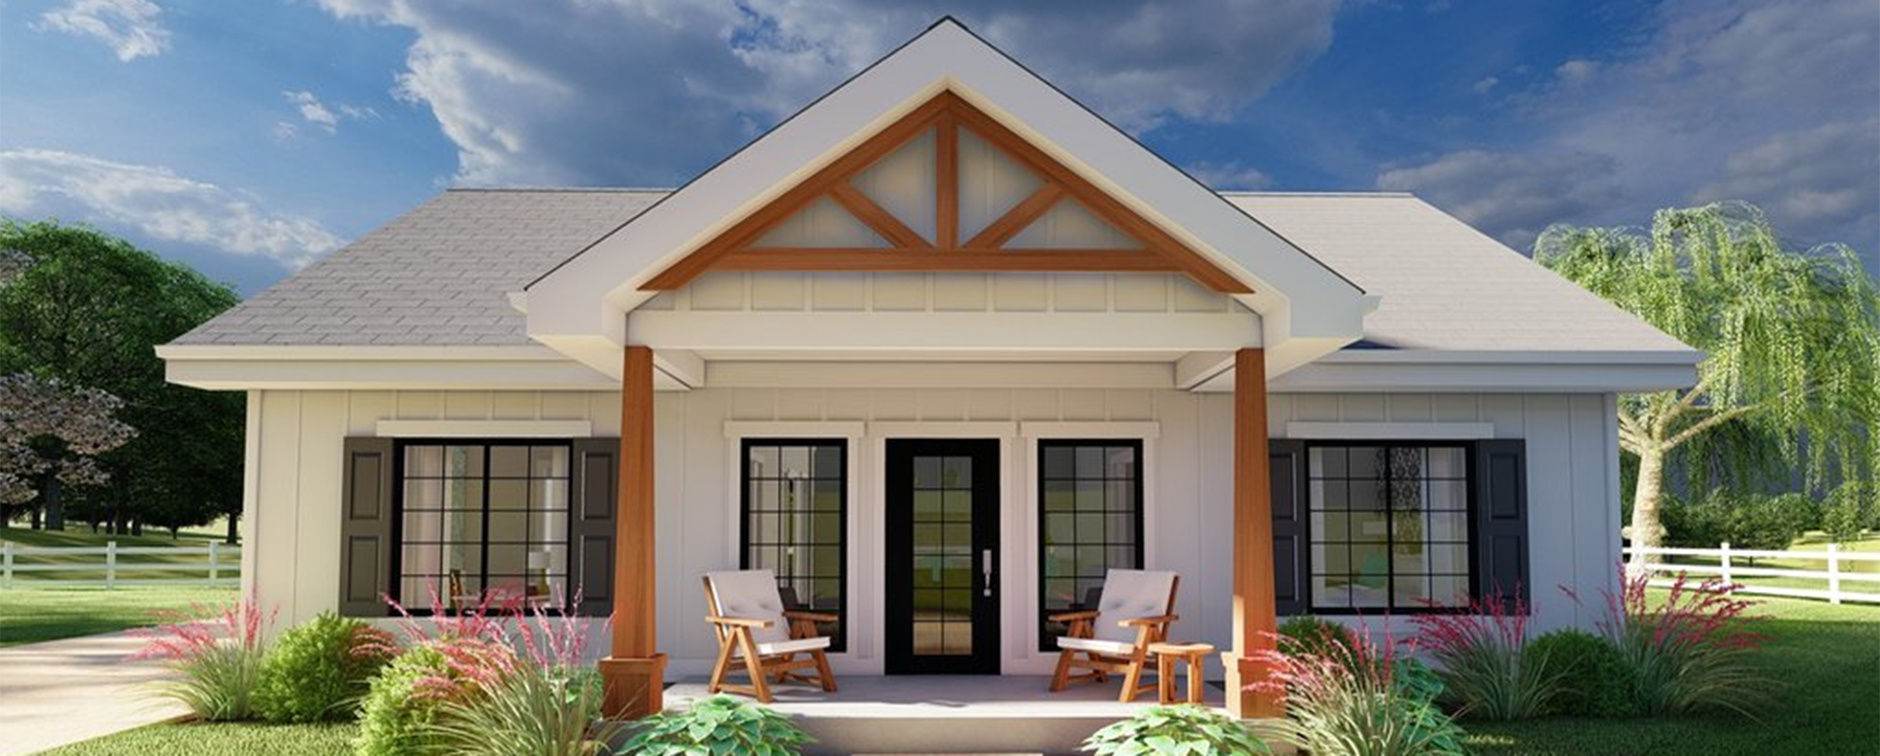 Build Within Your Budget with Affordable House Plans